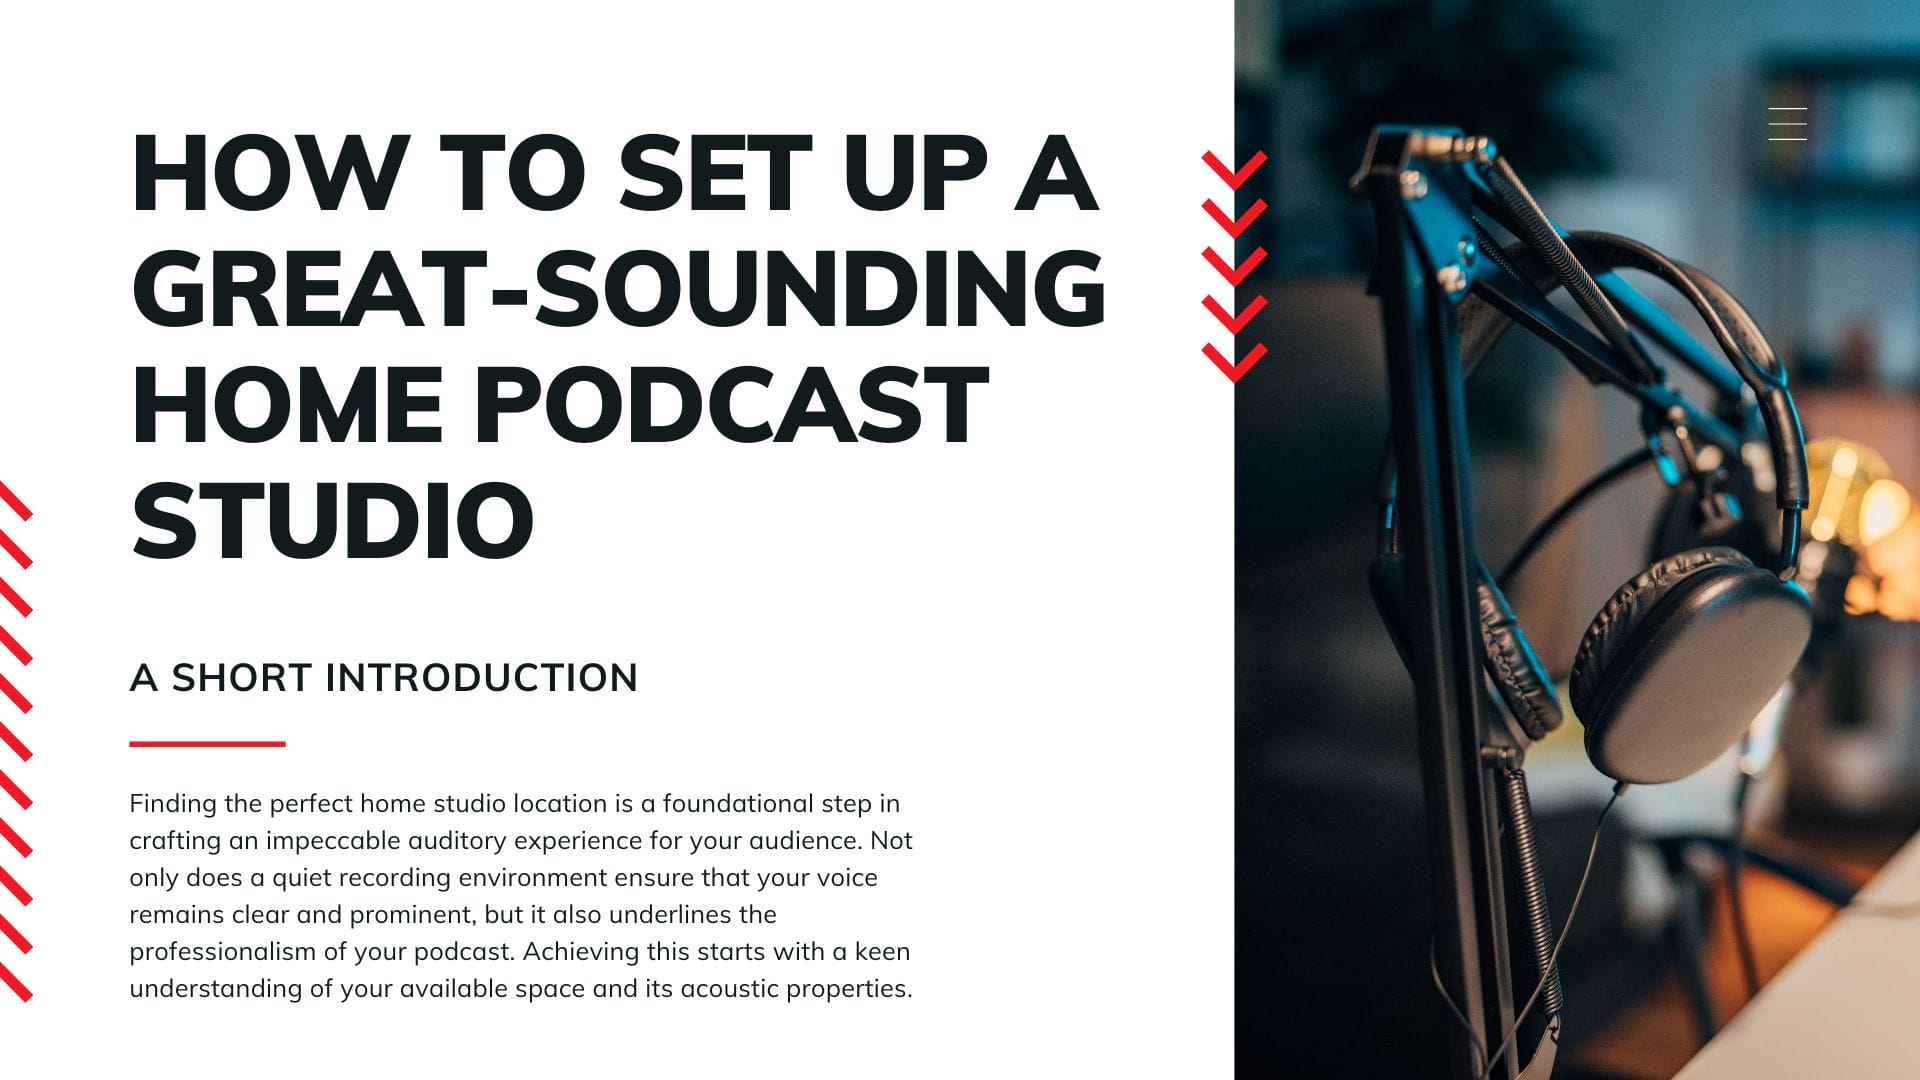 How to Set Up a Great-Sounding Home Podcast Studio